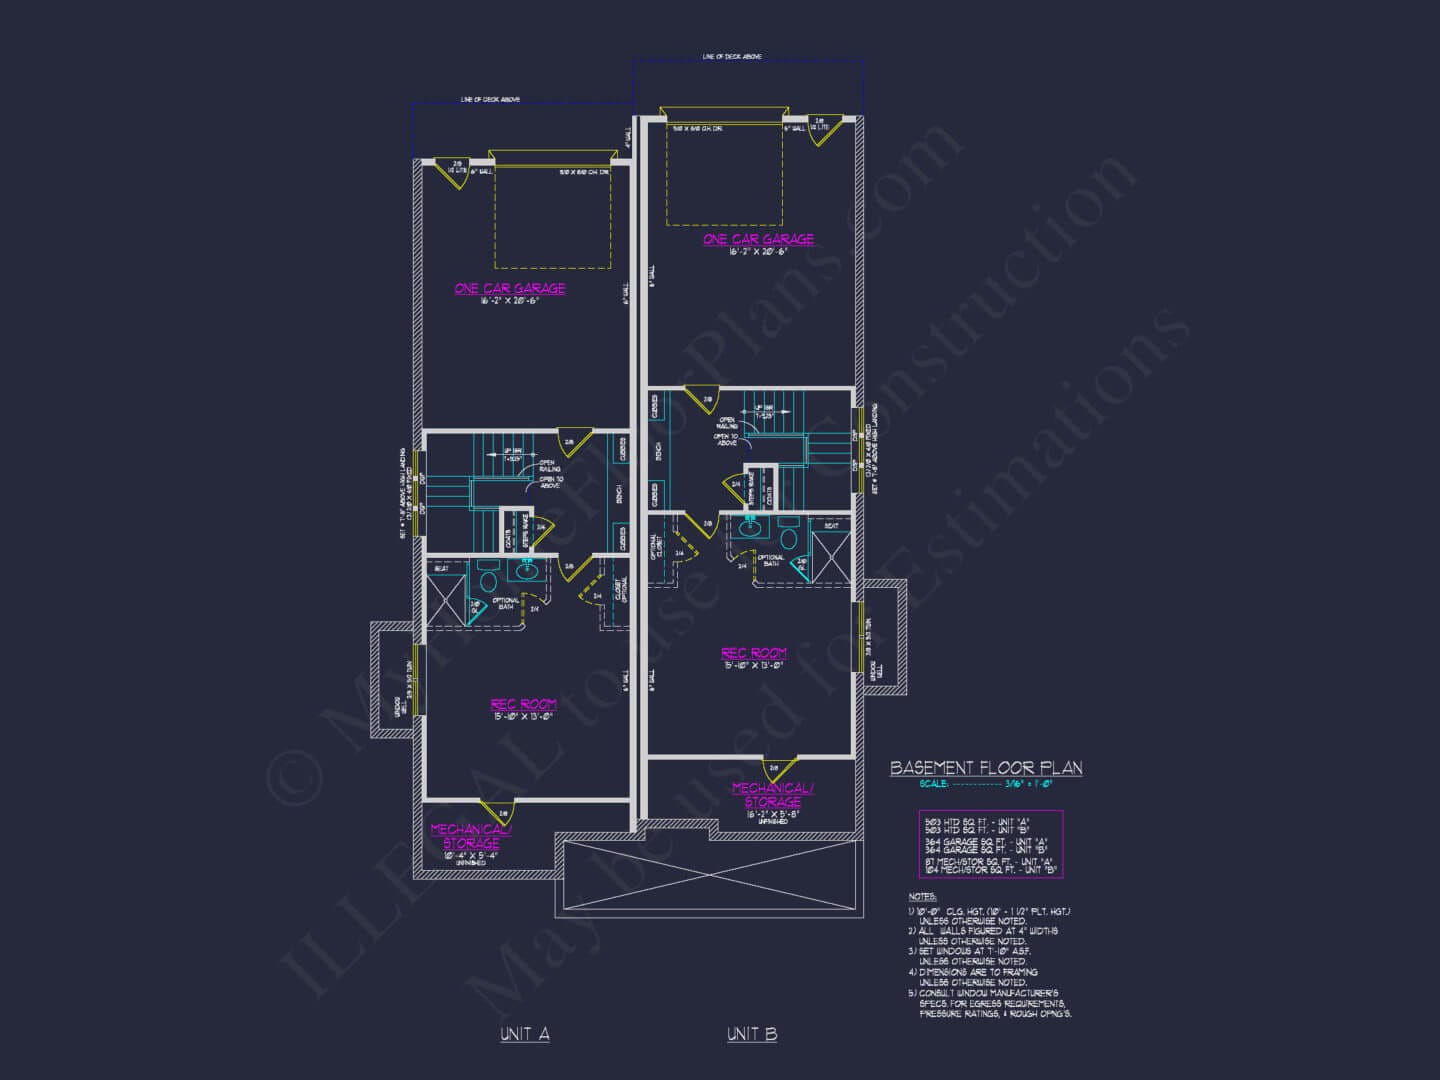 16-1286 duplex townhome apartment MY HOME FLOOR PLANS_Page_09